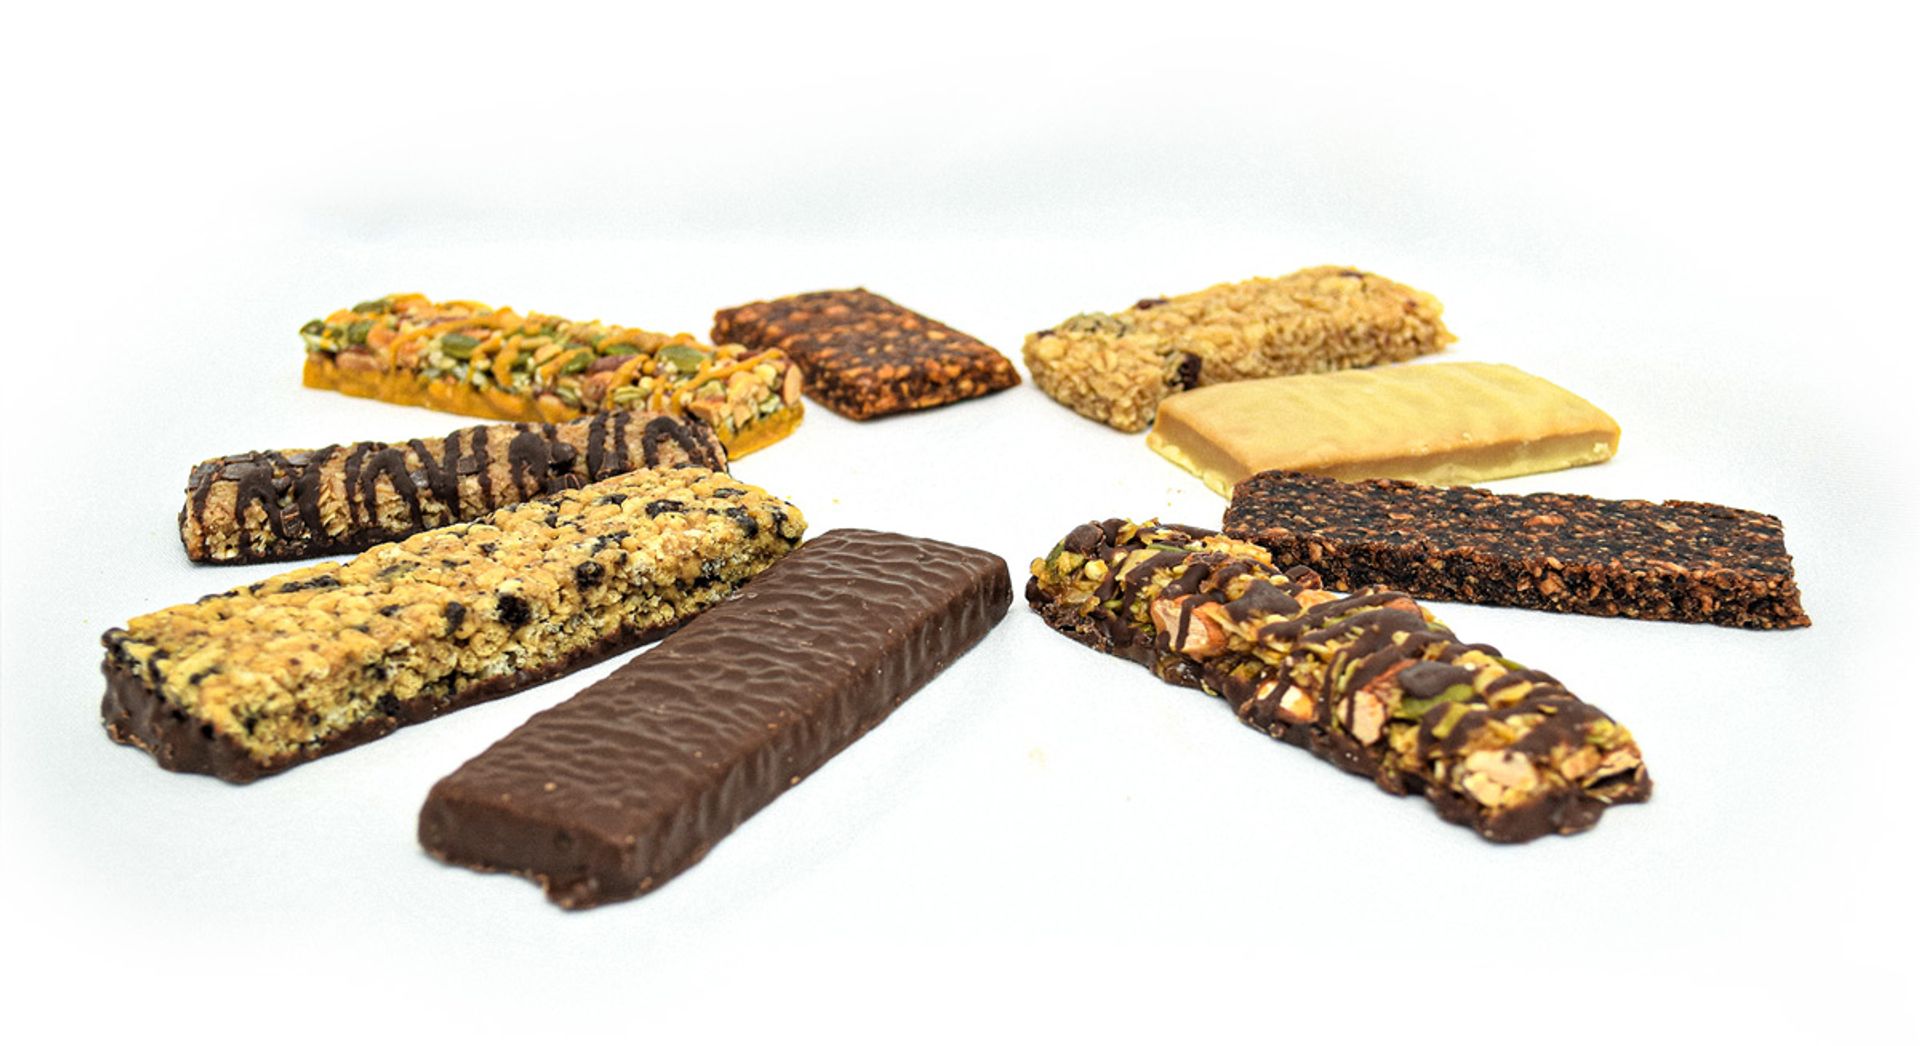 Variety of nutrition bars manufactured here.